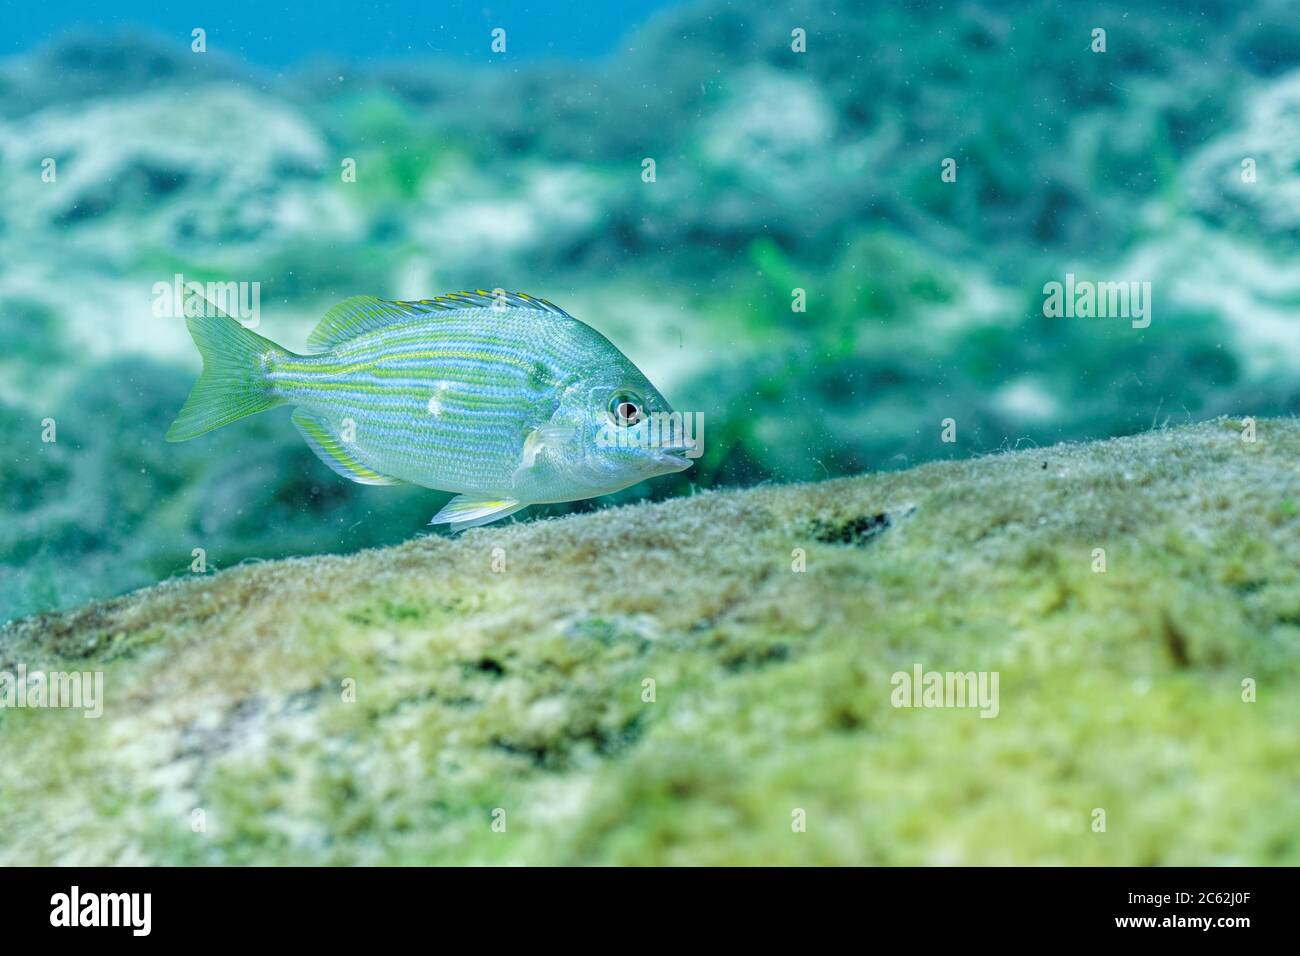 Pinfish (Lagodon rhomboides) in a central Florida freshwater spring. Pinfish are small fish used as bait to catch larger game fish, but are notorious Stock Photo